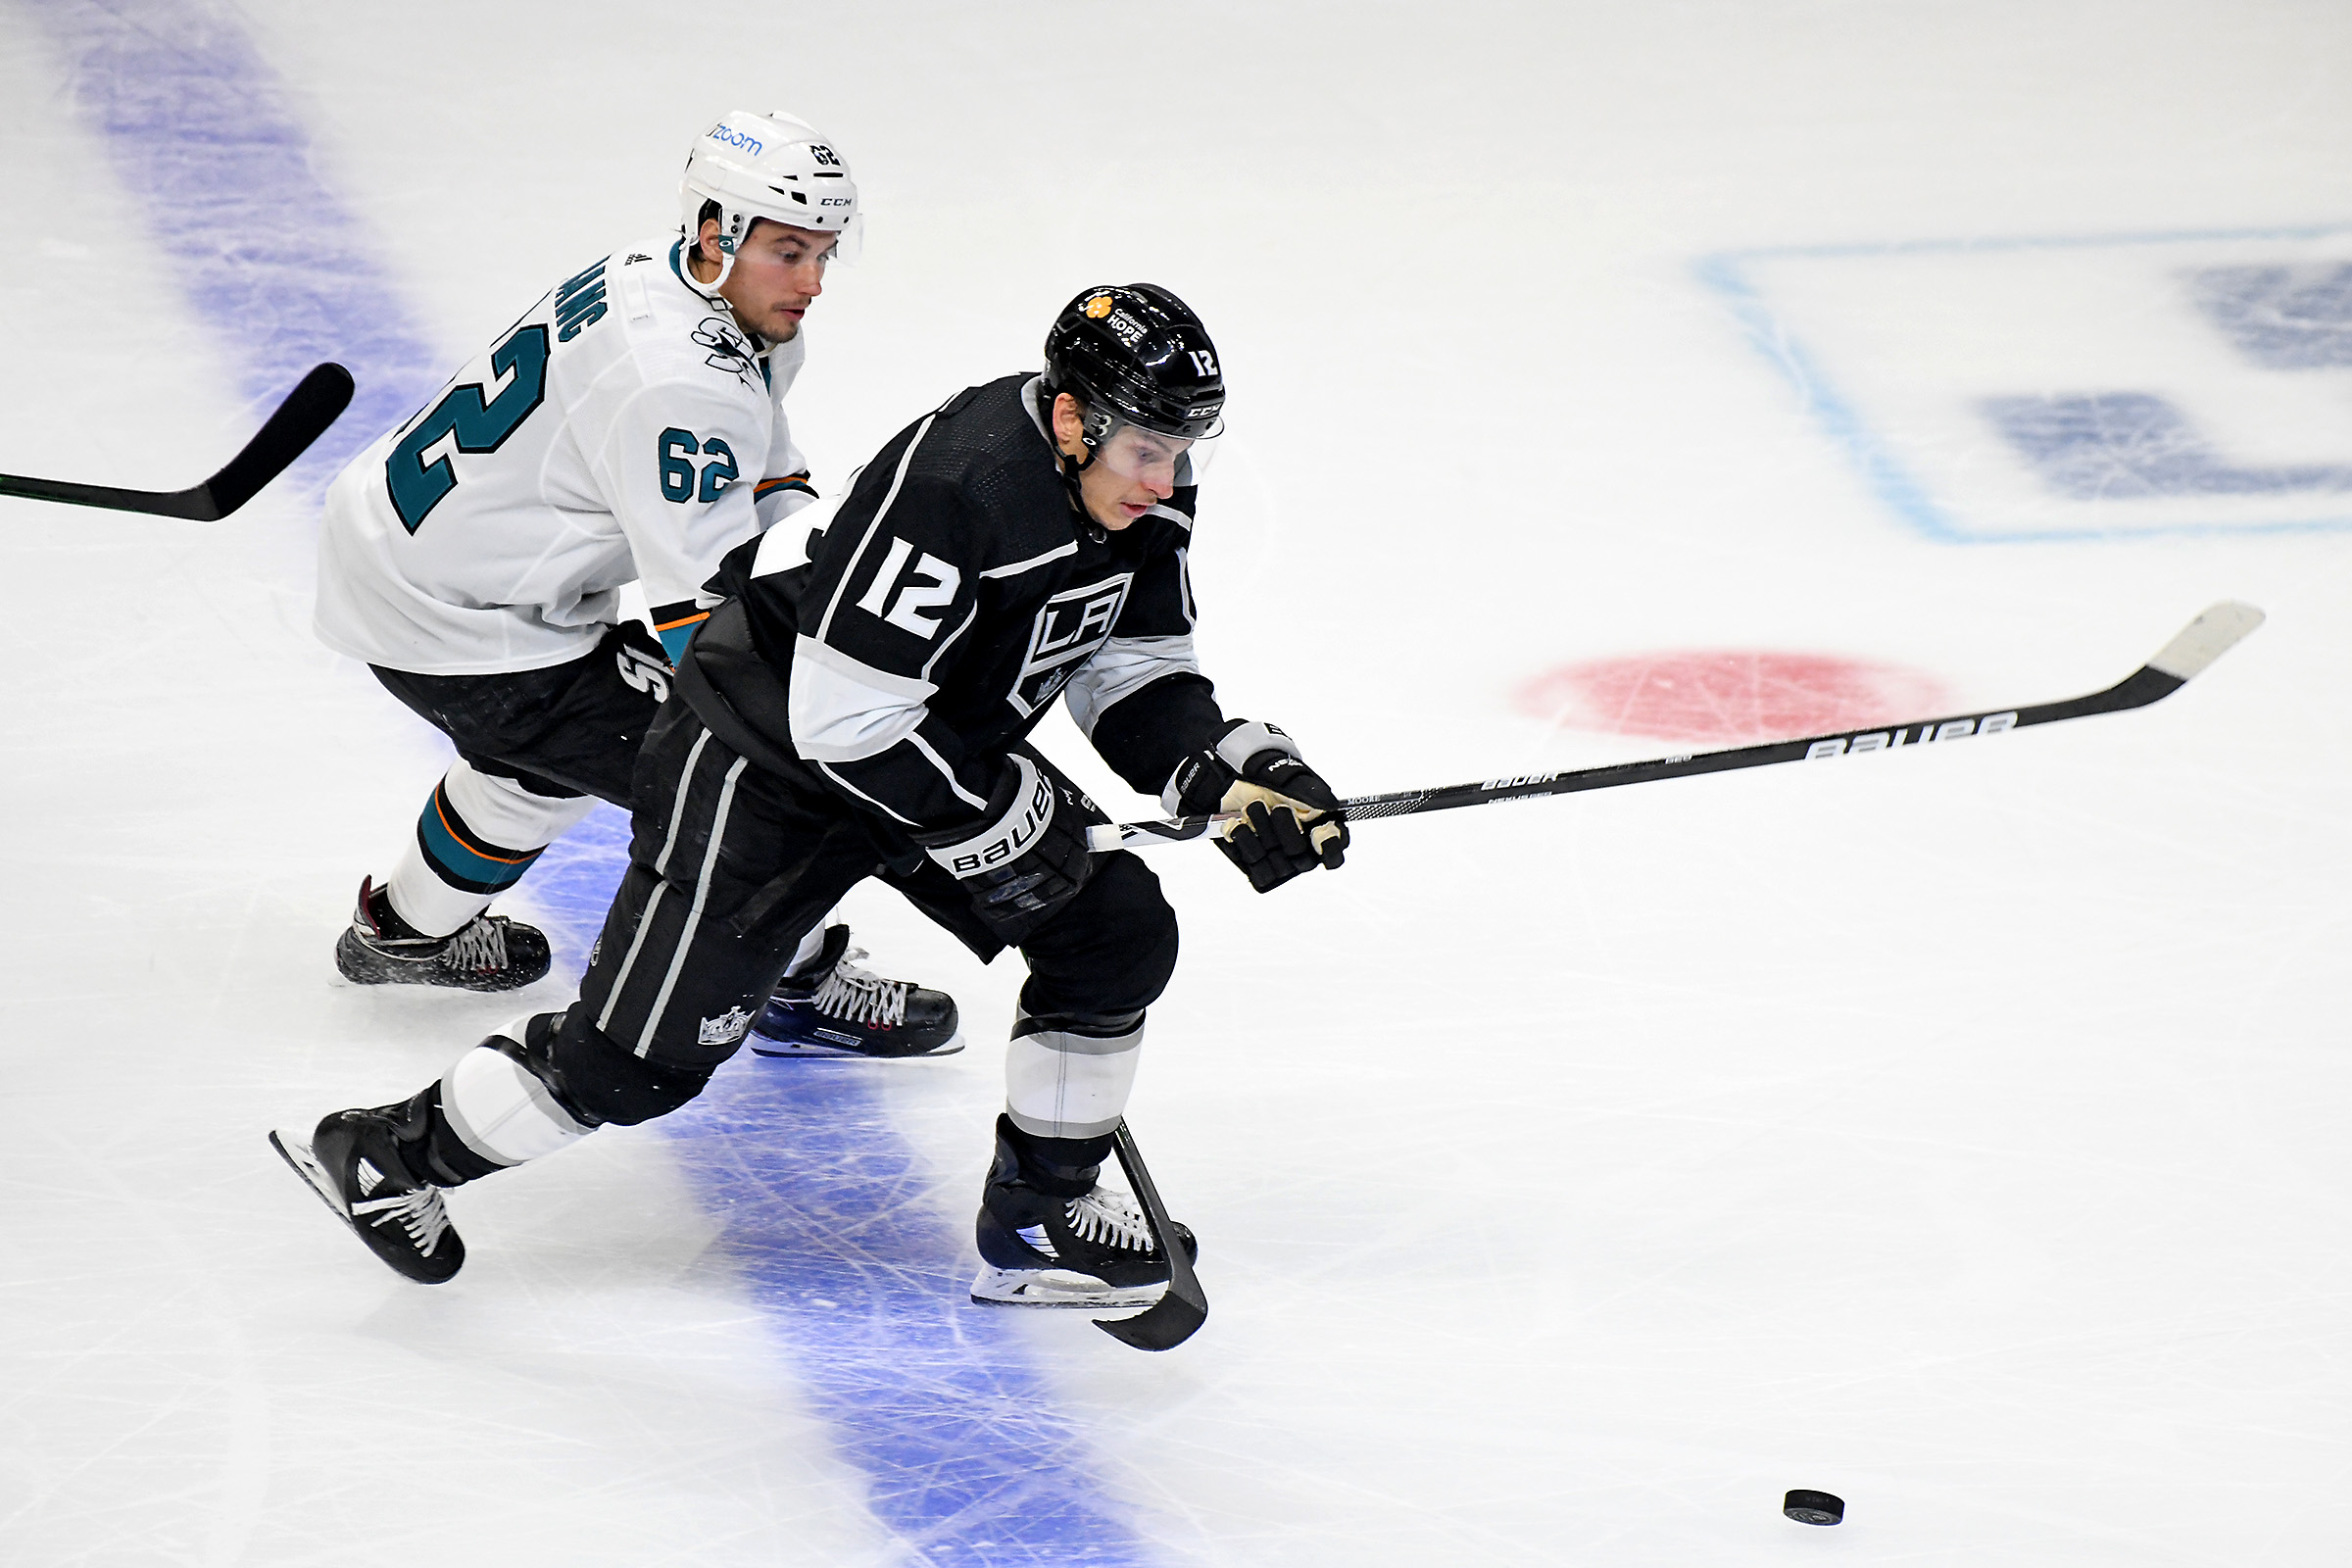 Los Angeles Kings Left Wing Trevor Moore (12) and San Jose Sharks Right Wing Kevin Labanc (62) battle for position during the second period on February 10, 2021 at the Staples Center in Los Angeles, CA.